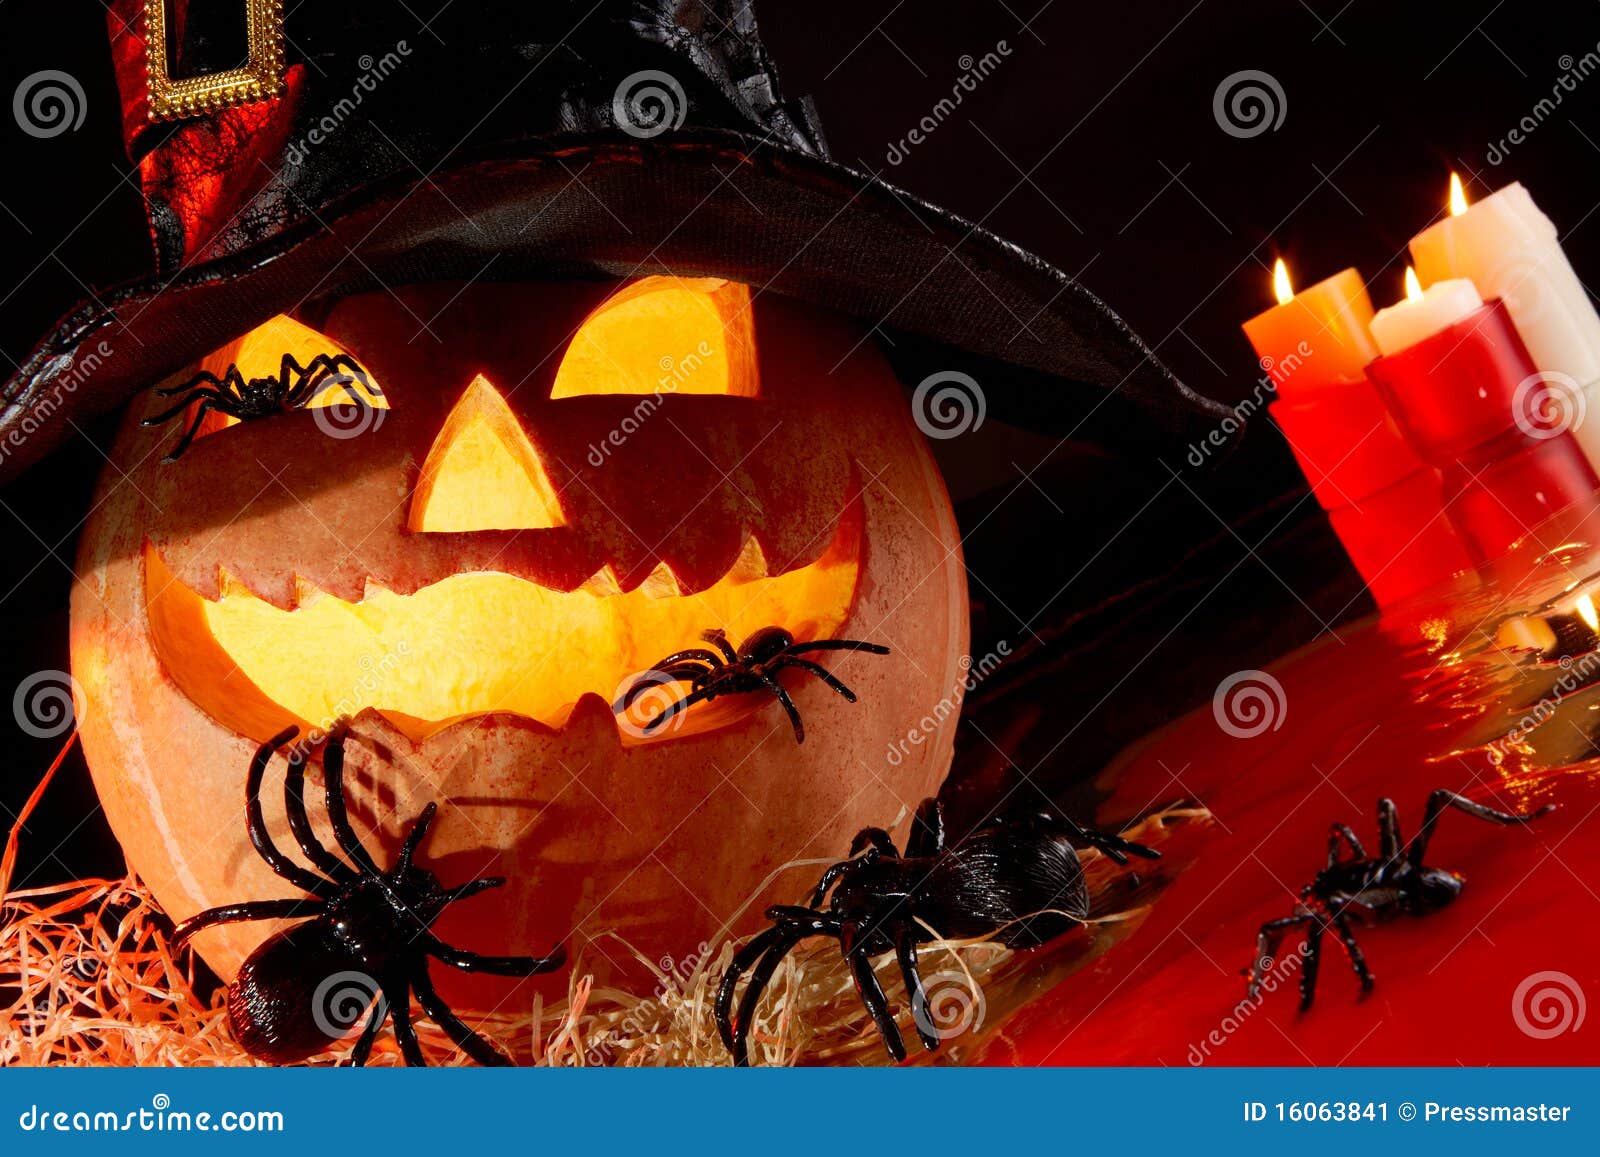 Pumpkin and spiders stock image. Image of evil, fearful - 16063841